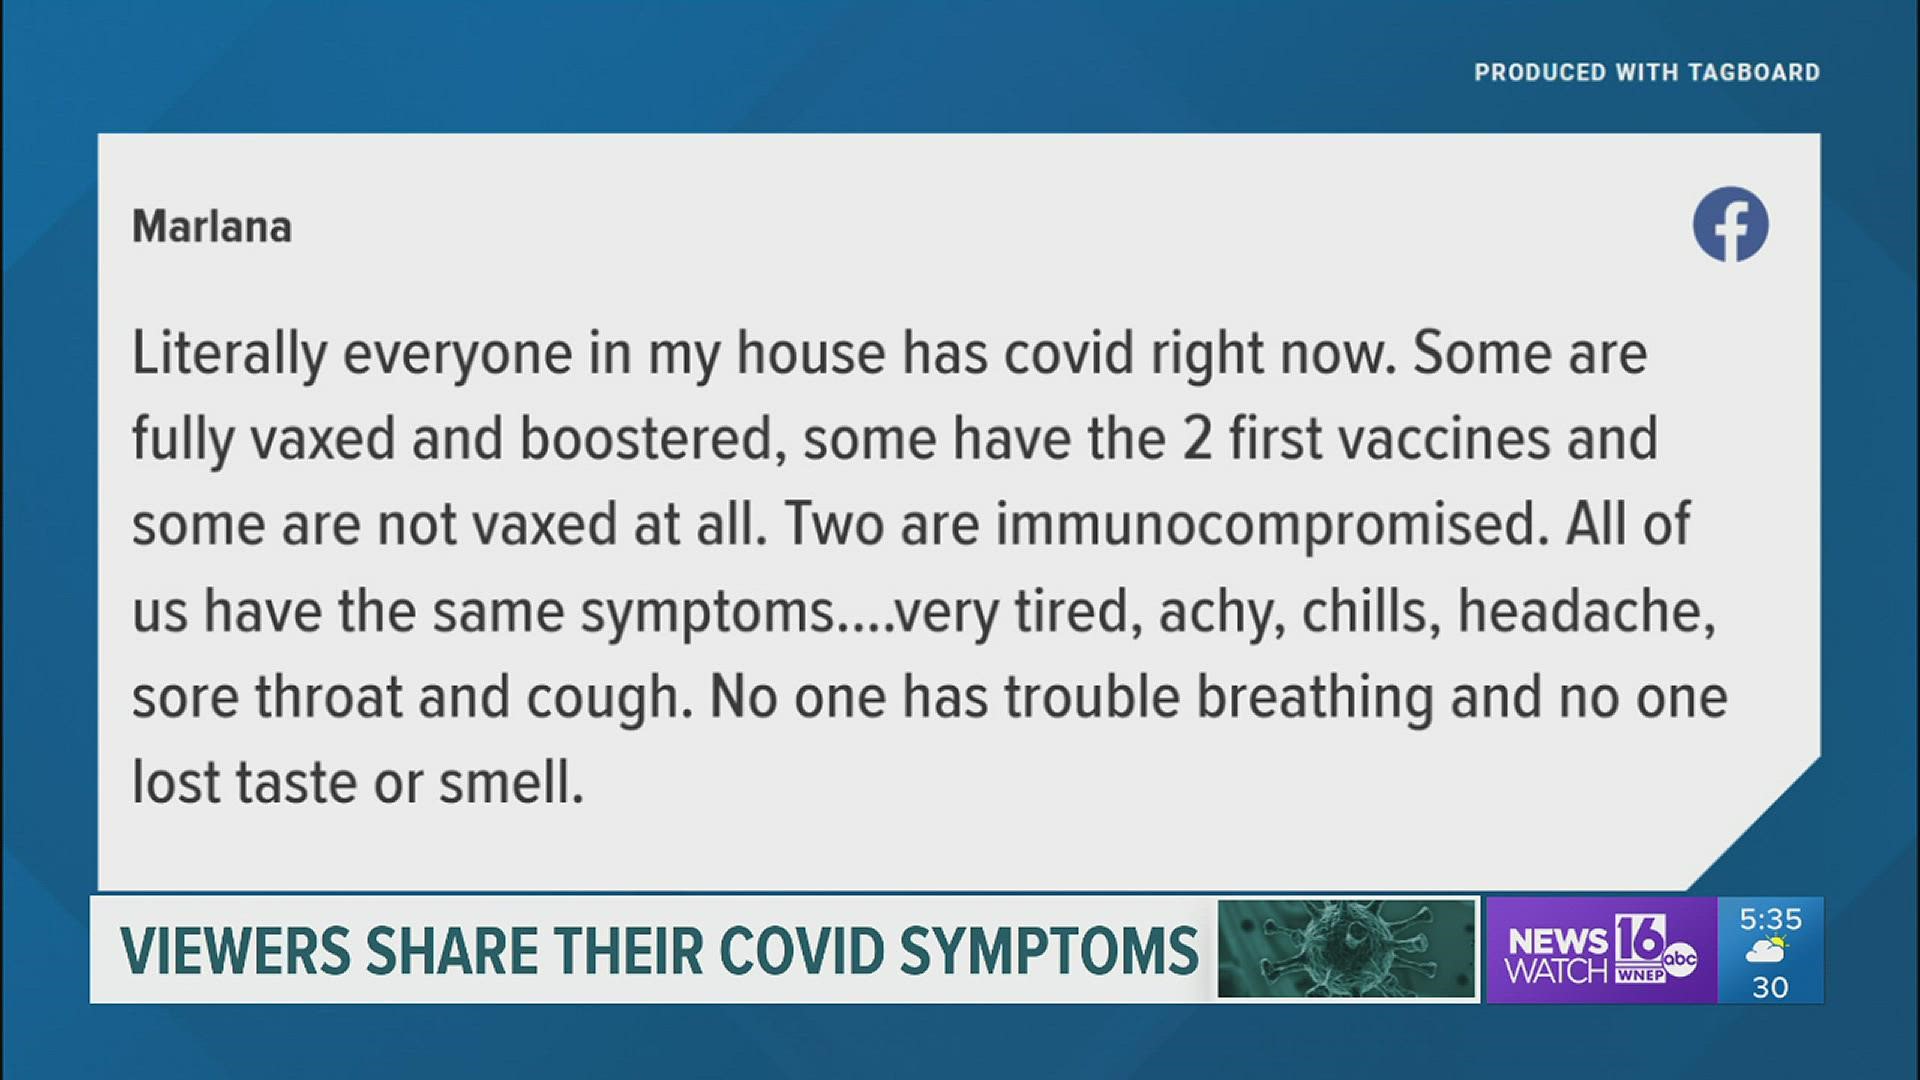 Viewers share their COVID-19 symptoms